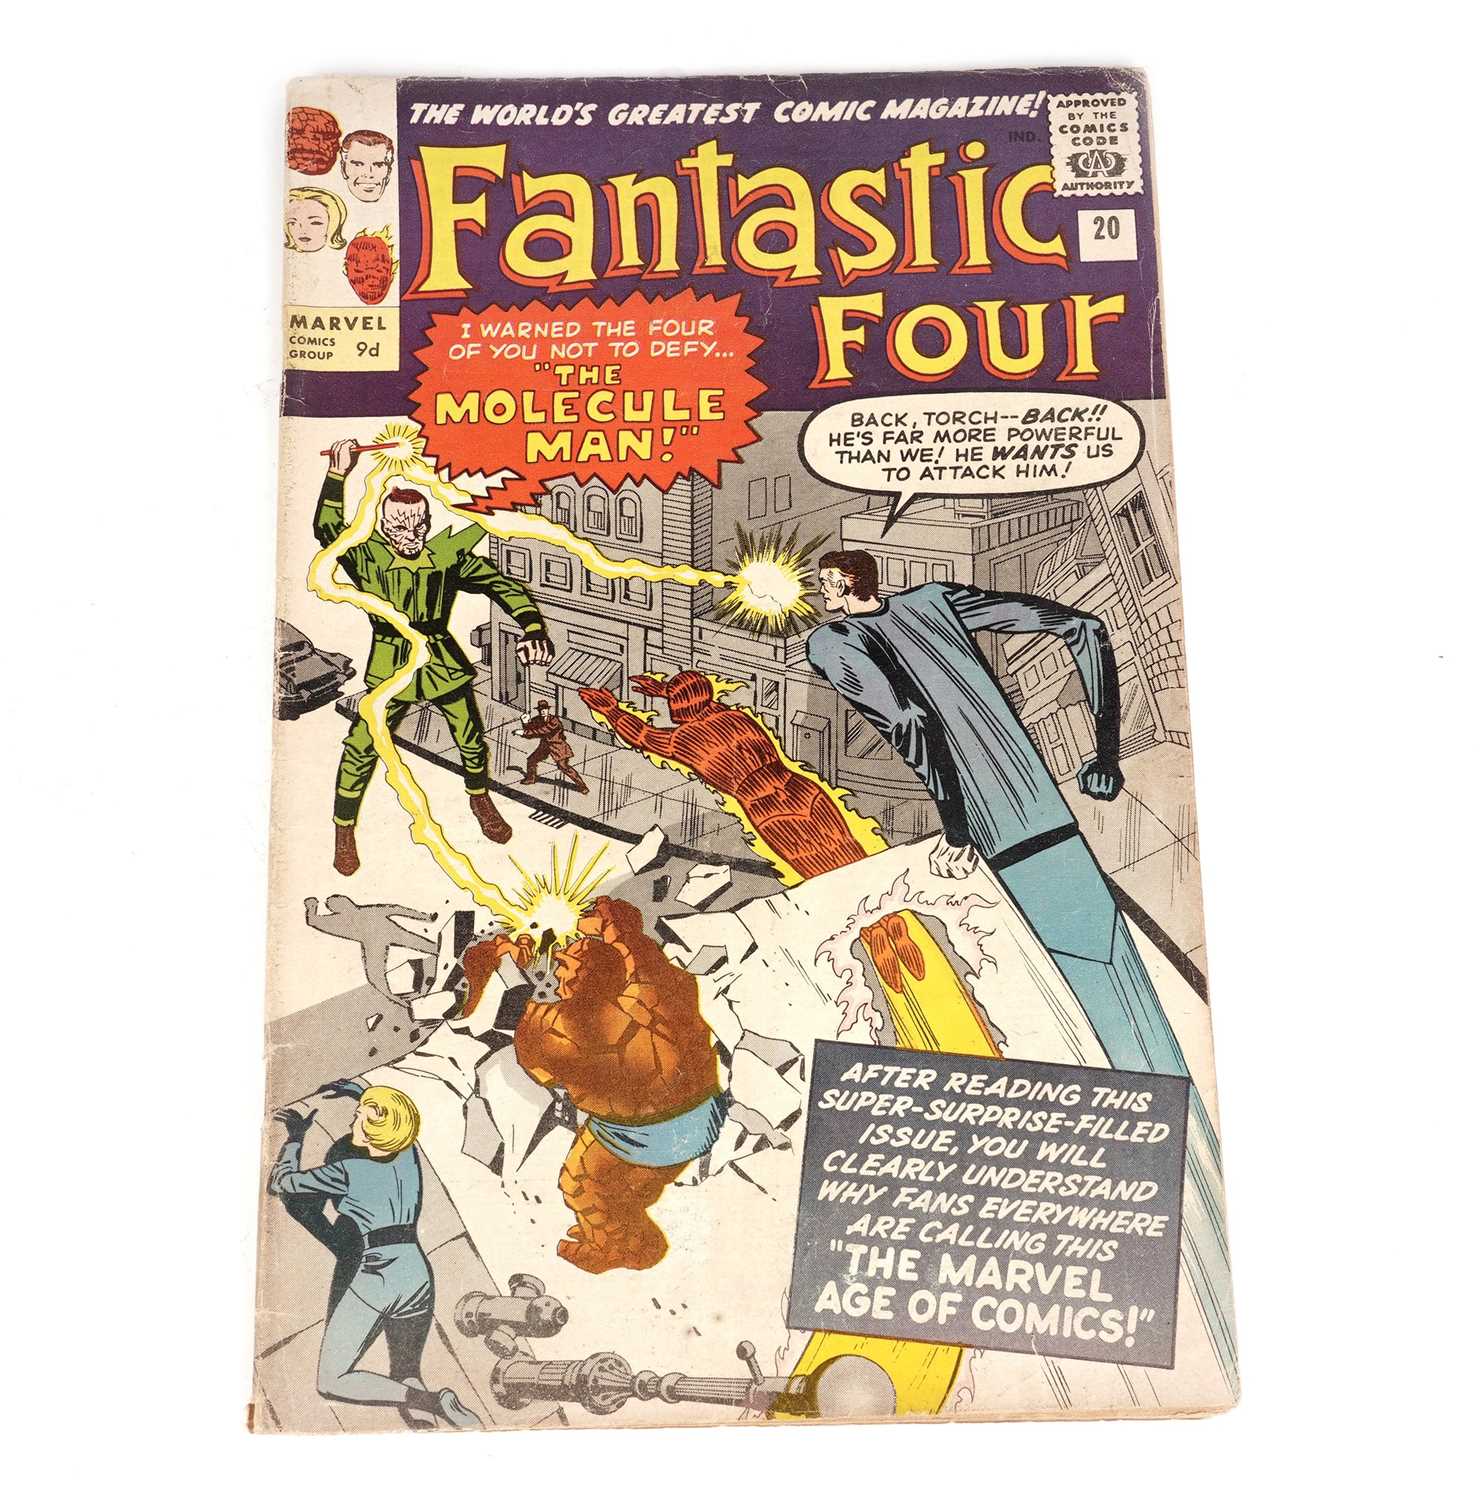 The Fantastic Four No. 20 by Marvel Comics